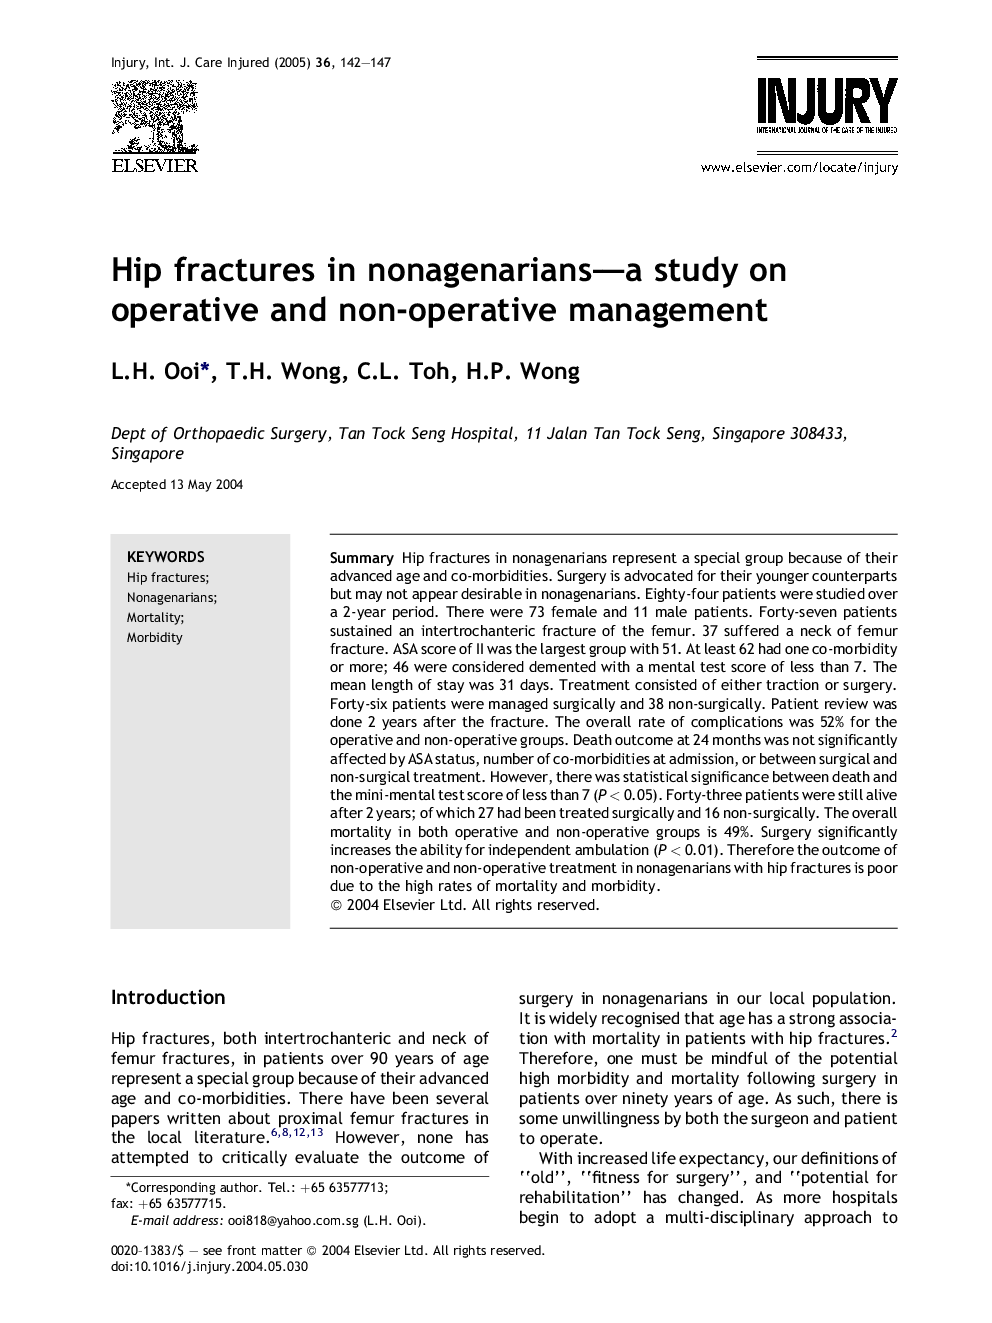 Hip fractures in nonagenarians-a study on operative and non-operative management